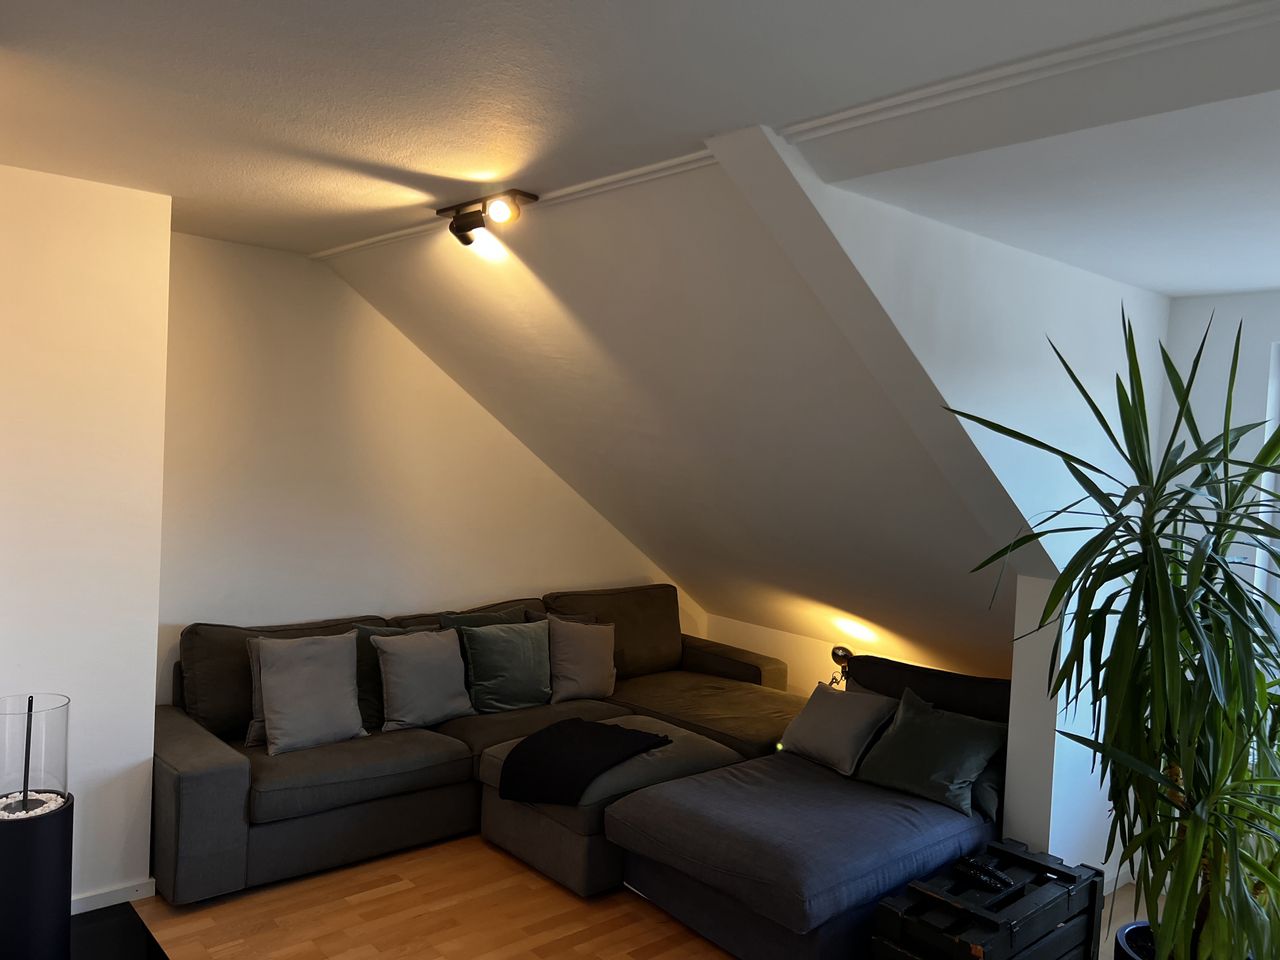 Cozy & charming loft in Munich with south-facing terrace incl. Garage parking